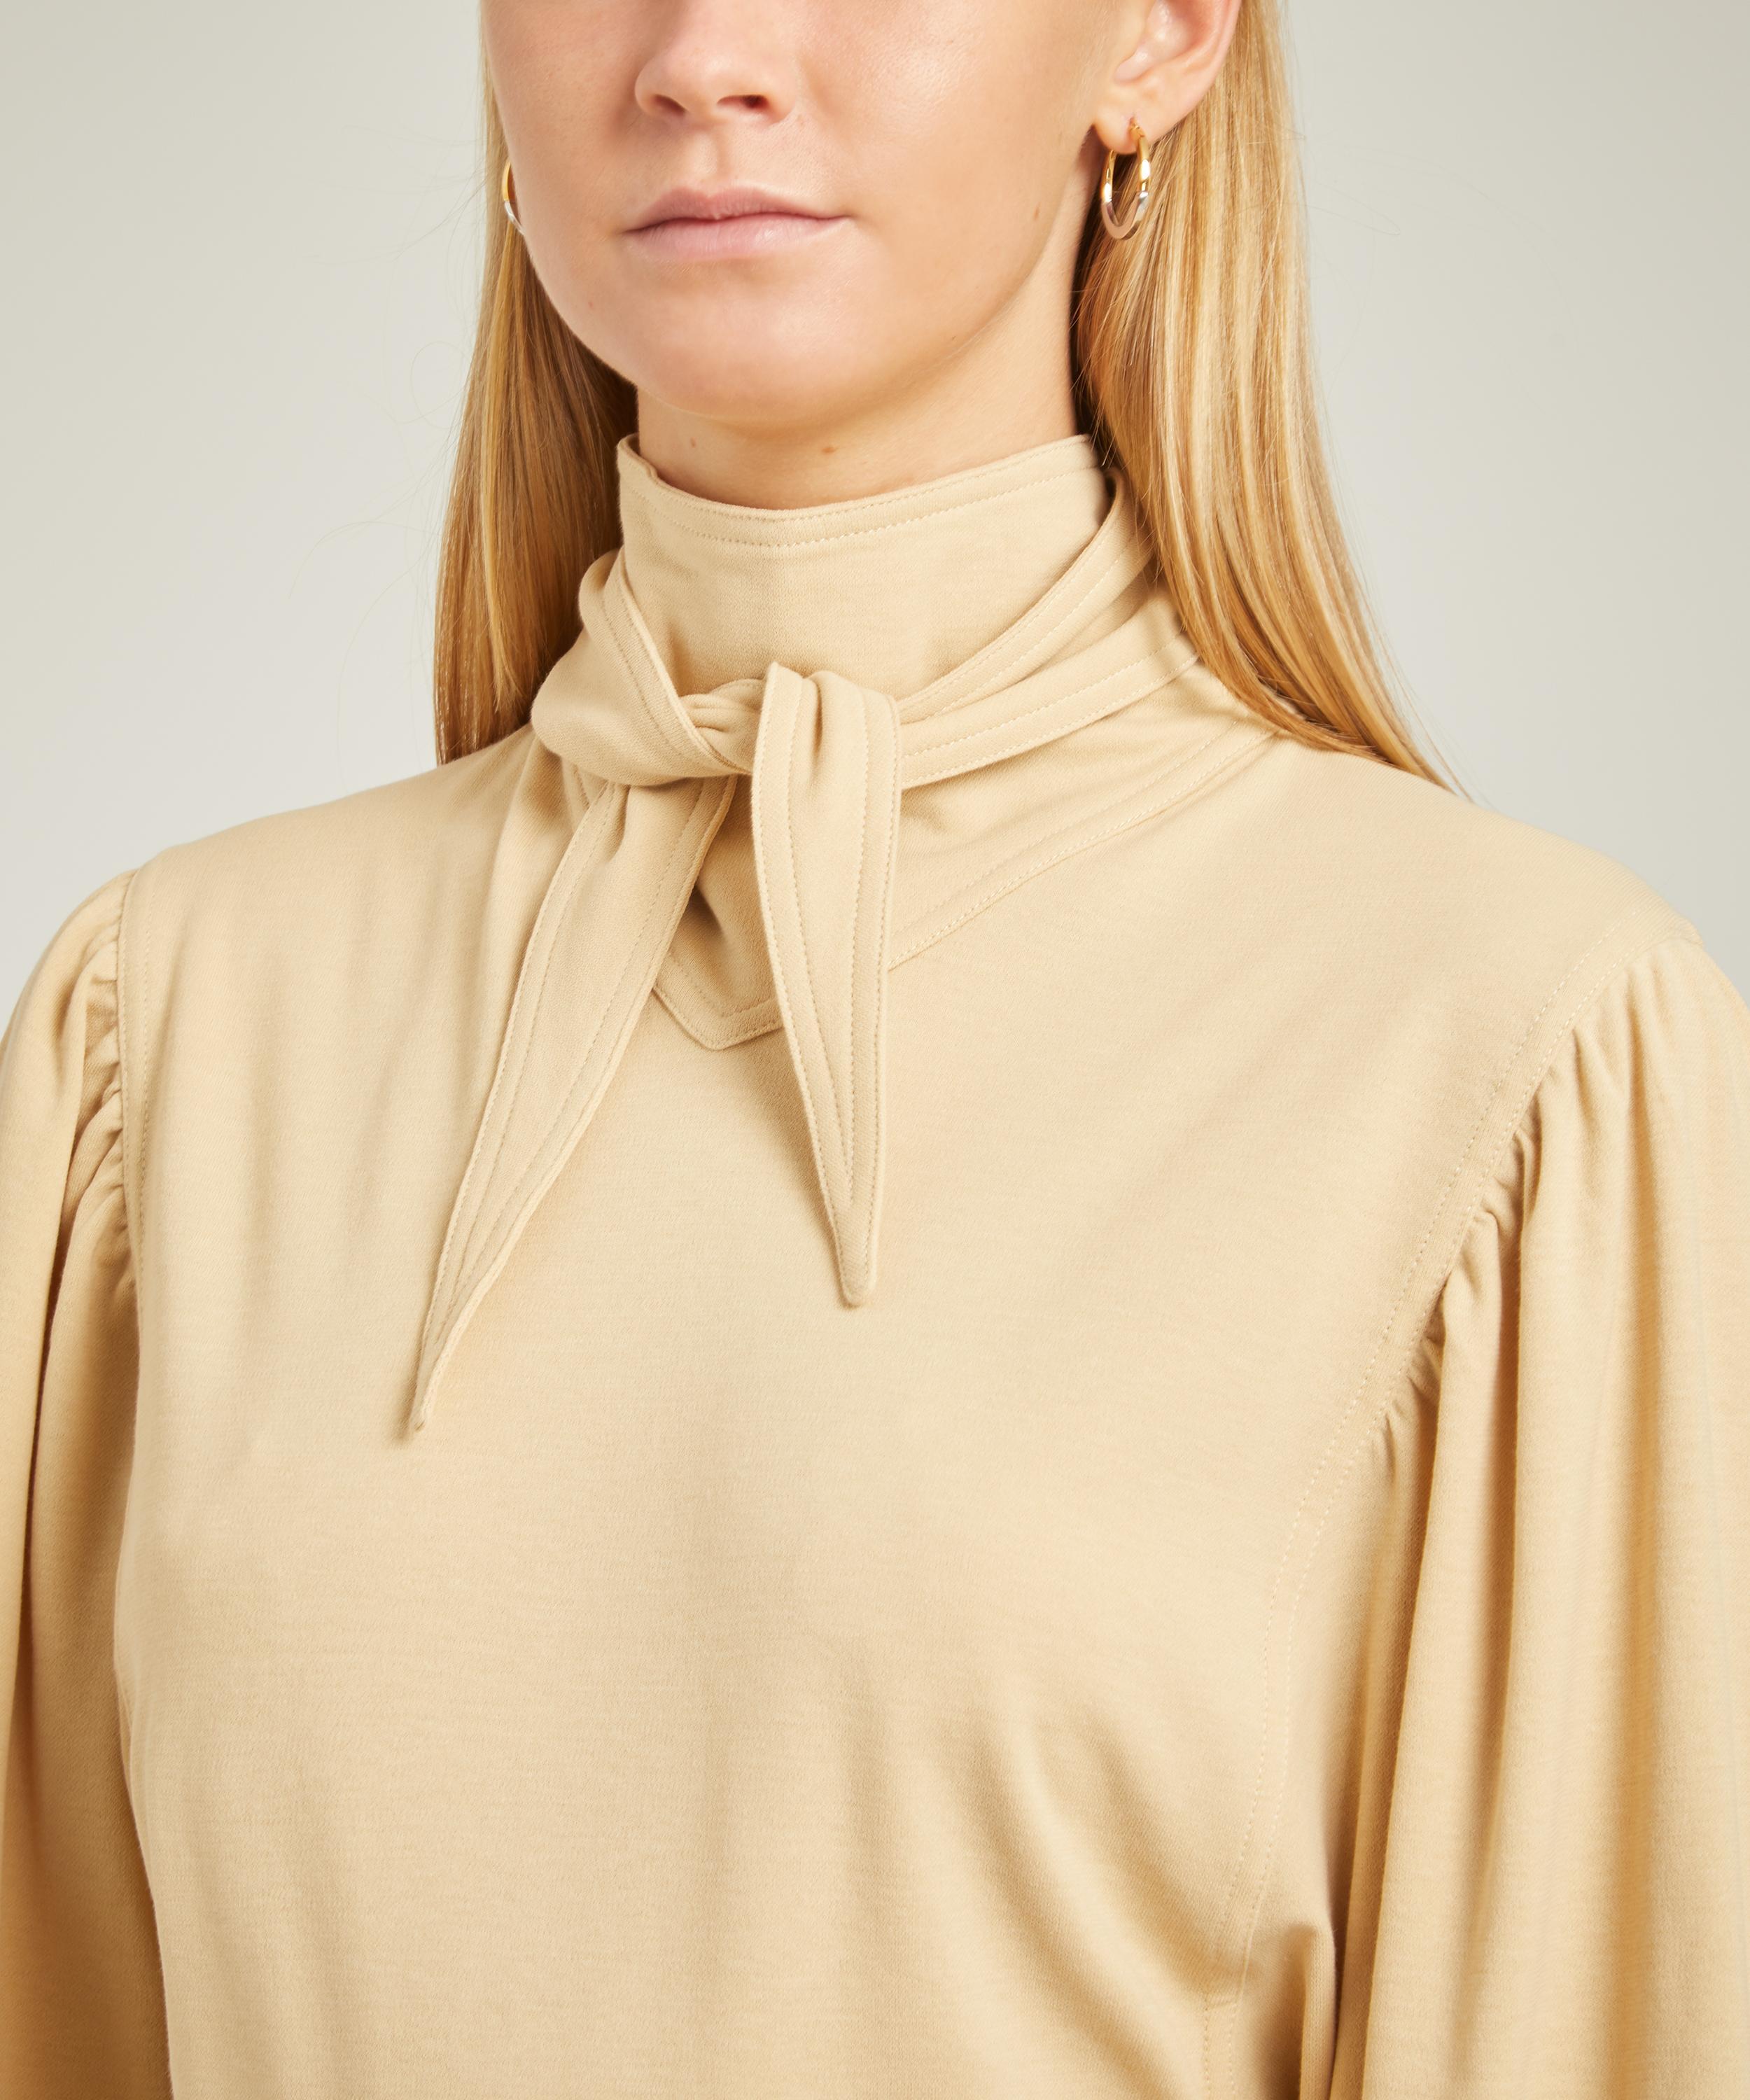 Lemaire Cotton Crepe Jersey Foulard Blouse in Natural - Lyst